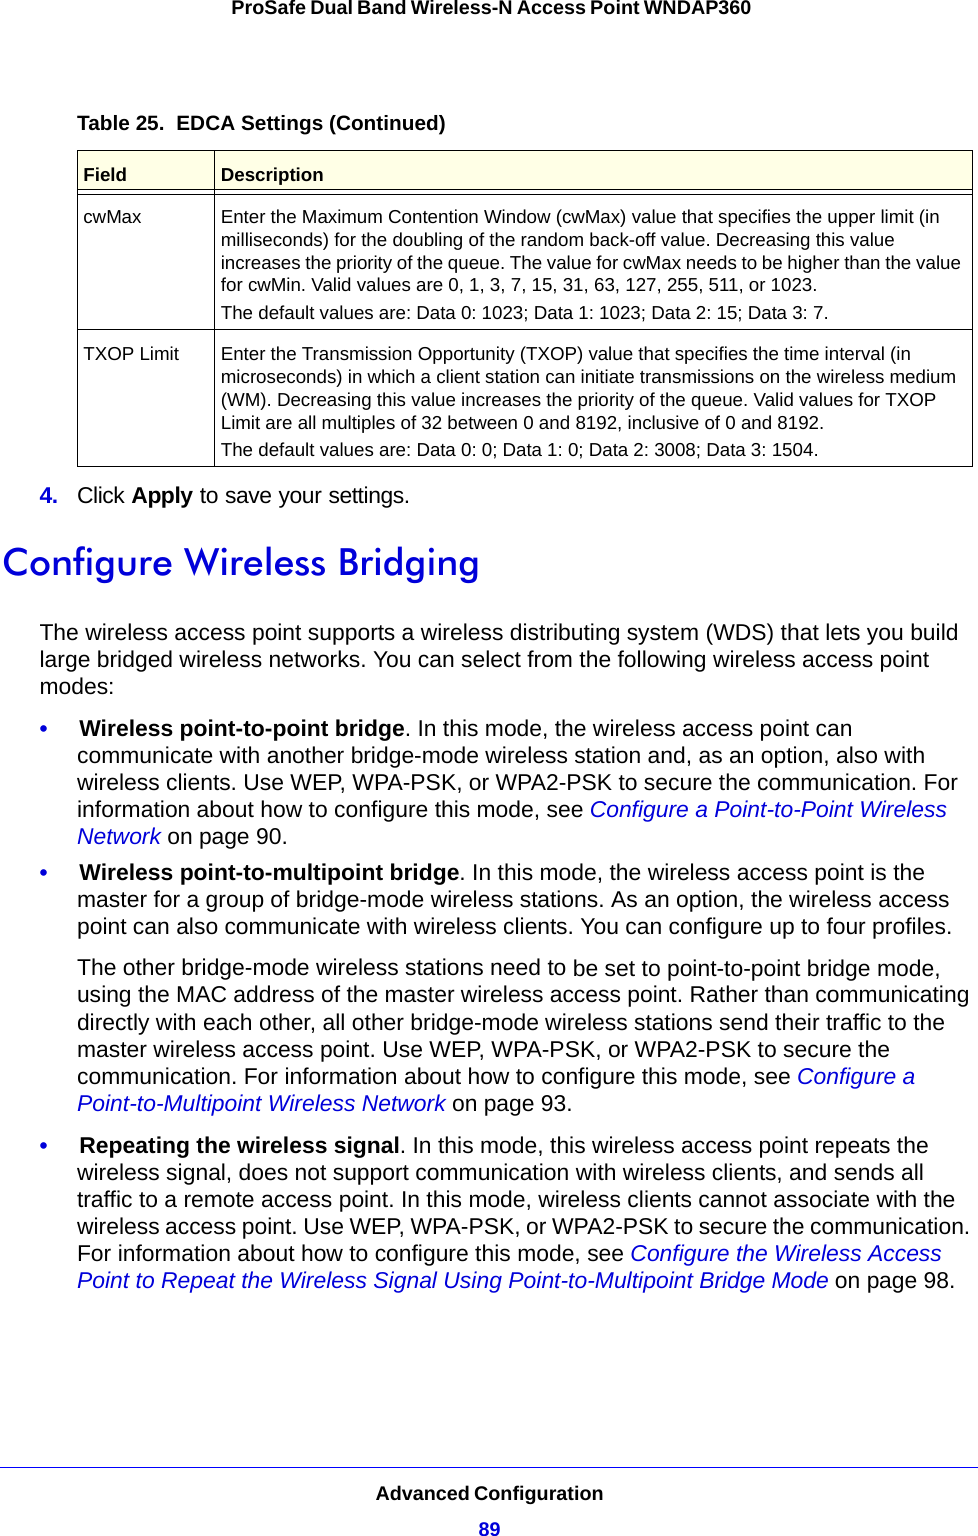 Advanced Configuration89 ProSafe Dual Band Wireless-N Access Point WNDAP3604.  Click Apply to save your settings. Configure Wireless BridgingThe wireless access point supports a wireless distributing system (WDS) that lets you build large bridged wireless networks. You can select from the following wireless access point modes:•     Wireless point-to-point bridge. In this mode, the wireless access point can communicate with another bridge-mode wireless station and, as an option, also with wireless clients. Use WEP, WPA-PSK, or WPA2-PSK to secure the communication. For information about how to configure this mode, see Configure a Point-to-Point Wireless Network on page 90.•     Wireless point-to-multipoint bridge. In this mode, the wireless access point is the master for a group of bridge-mode wireless stations. As an option, the wireless access point can also communicate with wireless clients. You can configure up to four profiles. The other bridge-mode wireless stations need to be set to point-to-point bridge mode, using the MAC address of the master wireless access point. Rather than communicating directly with each other, all other bridge-mode wireless stations send their traffic to the master wireless access point. Use WEP, WPA-PSK, or WPA2-PSK to secure the communication. For information about how to configure this mode, see Configure a Point-to-Multipoint Wireless Network on page 93.•     Repeating the wireless signal. In this mode, this wireless access point repeats the wireless signal, does not support communication with wireless clients, and sends all traffic to a remote access point. In this mode, wireless clients cannot associate with the wireless access point. Use WEP, WPA-PSK, or WPA2-PSK to secure the communication. For information about how to configure this mode, see Configure the Wireless Access Point to Repeat the Wireless Signal Using Point-to-Multipoint Bridge Mode on page 98.cwMax  Enter the Maximum Contention Window (cwMax) value that specifies the upper limit (in milliseconds) for the doubling of the random back-off value. Decreasing this value increases the priority of the queue. The value for cwMax needs to be higher than the value for cwMin. Valid values are 0, 1, 3, 7, 15, 31, 63, 127, 255, 511, or 1023. The default values are: Data 0: 1023; Data 1: 1023; Data 2: 15; Data 3: 7.TXOP Limit Enter the Transmission Opportunity (TXOP) value that specifies the time interval (in microseconds) in which a client station can initiate transmissions on the wireless medium (WM). Decreasing this value increases the priority of the queue. Valid values for TXOP Limit are all multiples of 32 between 0 and 8192, inclusive of 0 and 8192.The default values are: Data 0: 0; Data 1: 0; Data 2: 3008; Data 3: 1504.Table 25.  EDCA Settings (Continued)Field Description